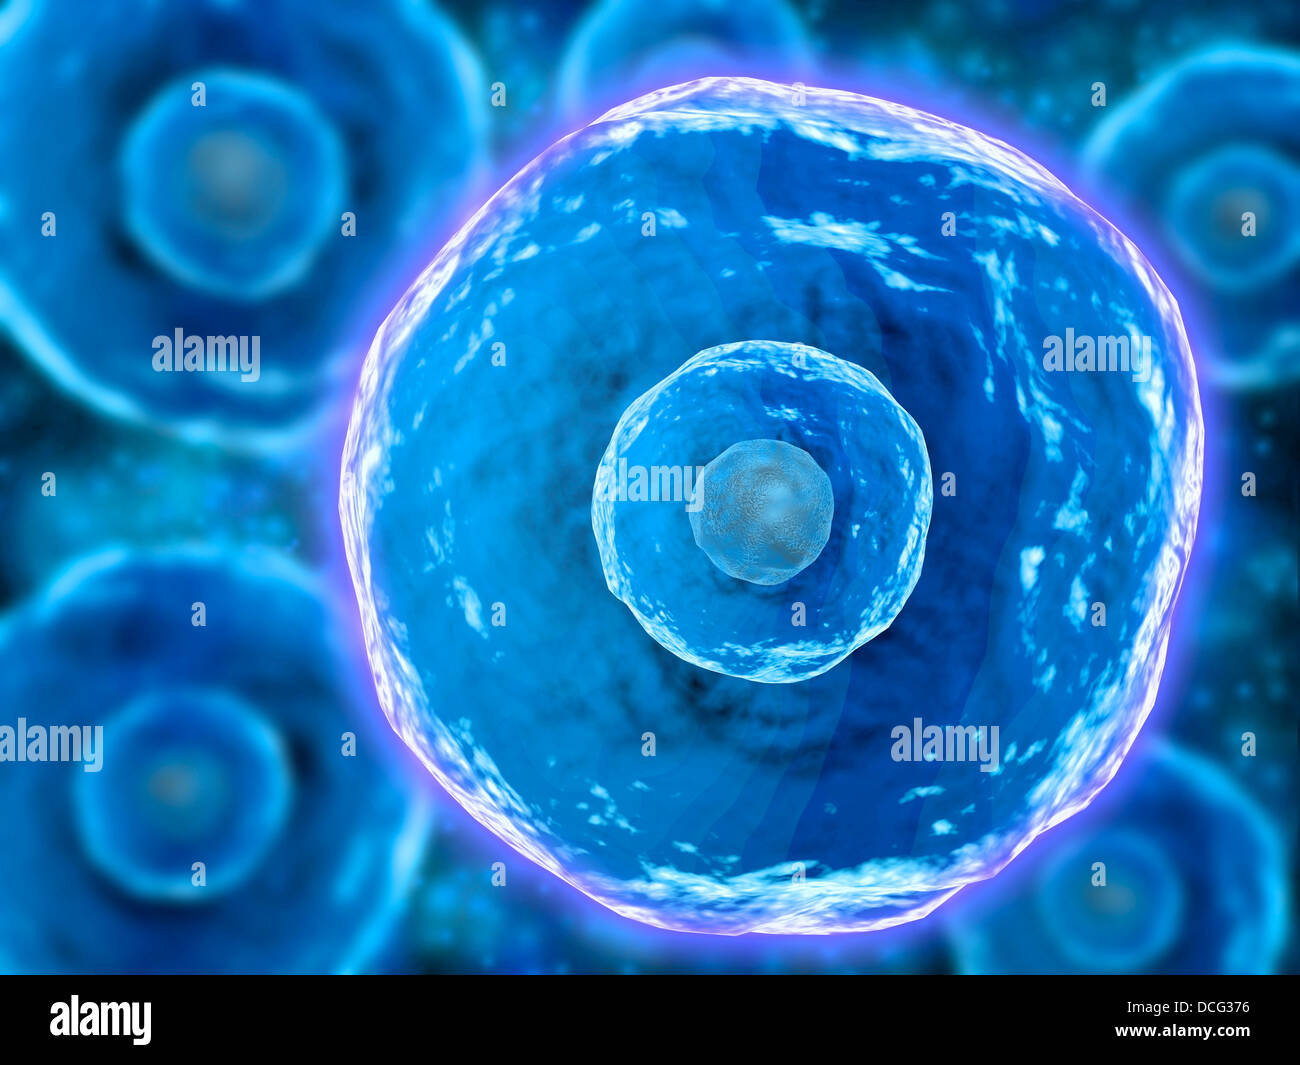 Group of human B-cells which play a large role in the immune response system. Stock Photo